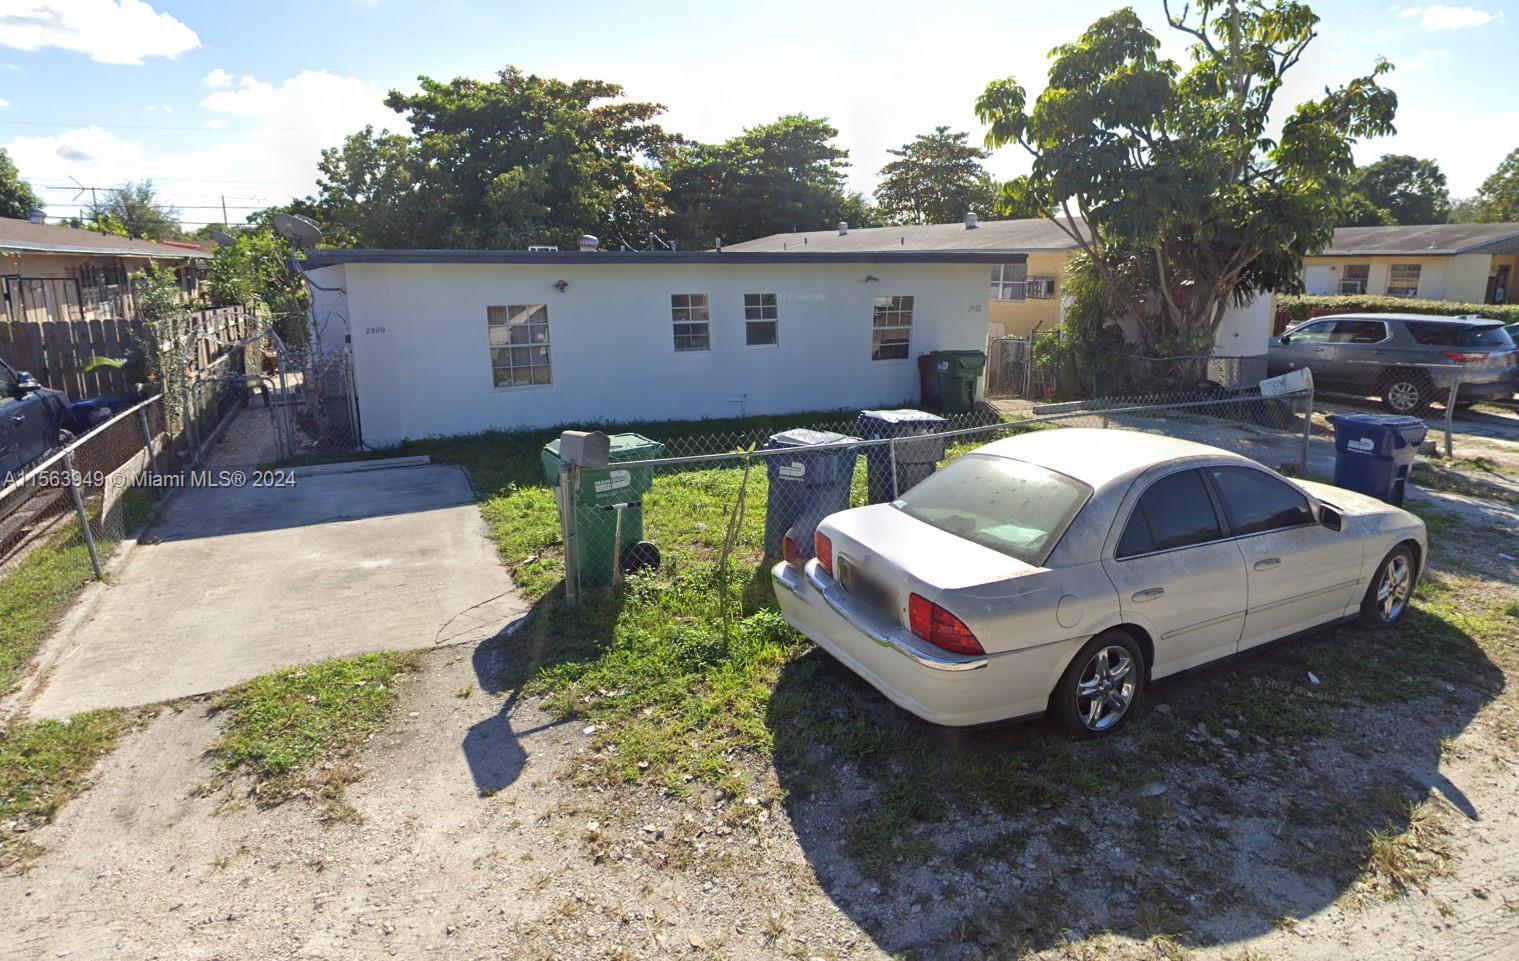 Photo of 2982 NW 91st St #N/A in Miami, FL